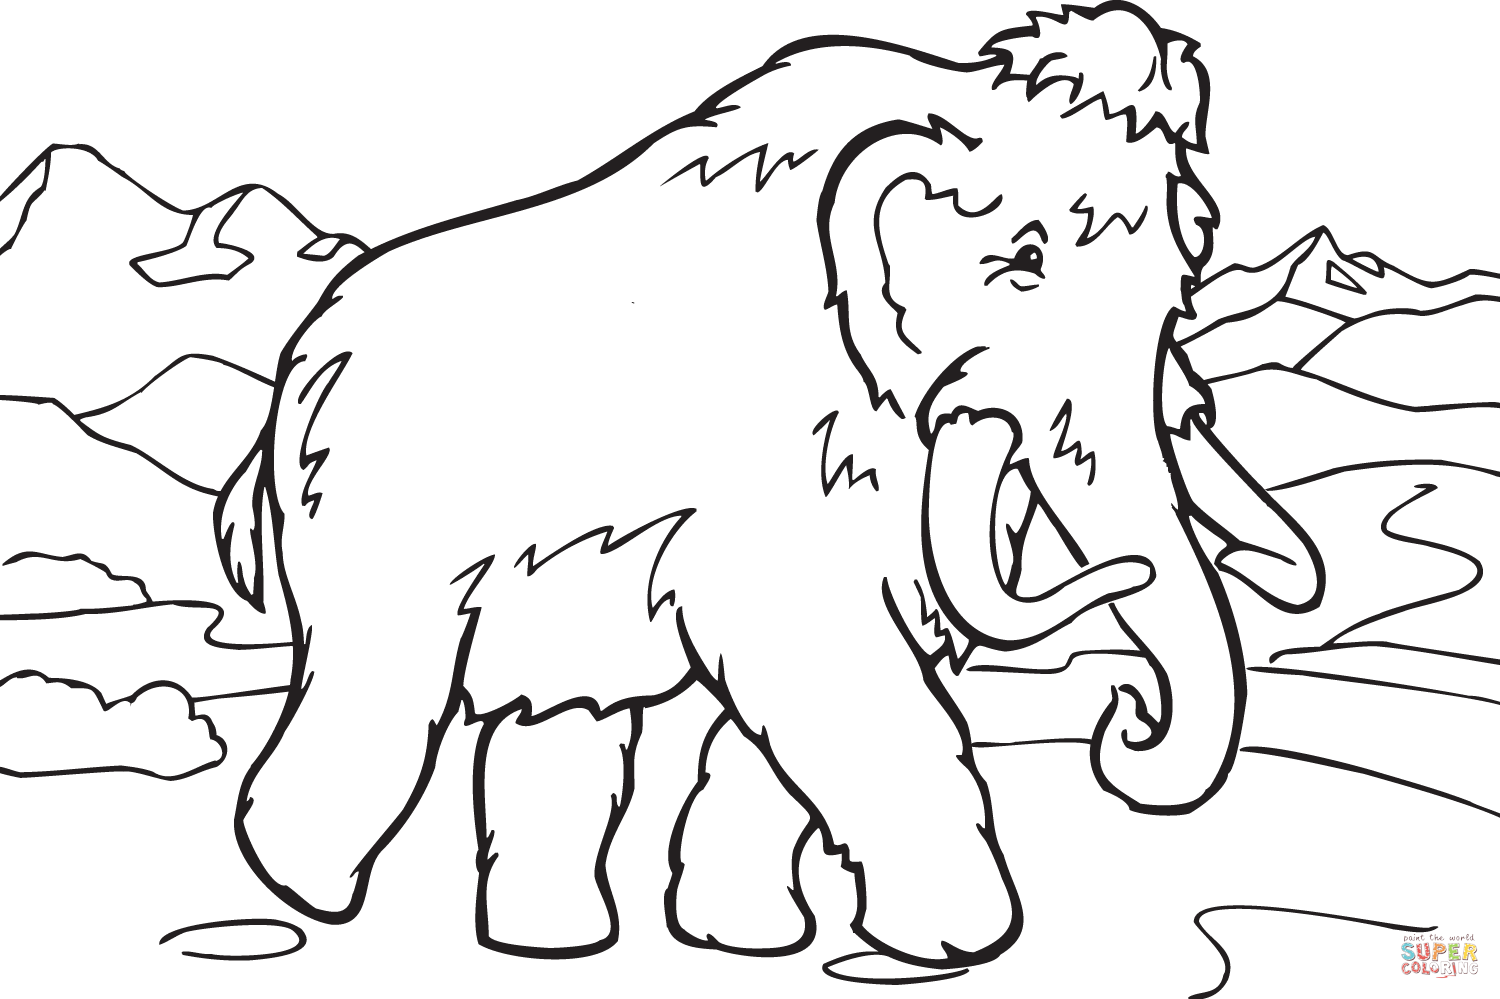 Walking Mammoth coloring page | Free Printable Coloring Pages